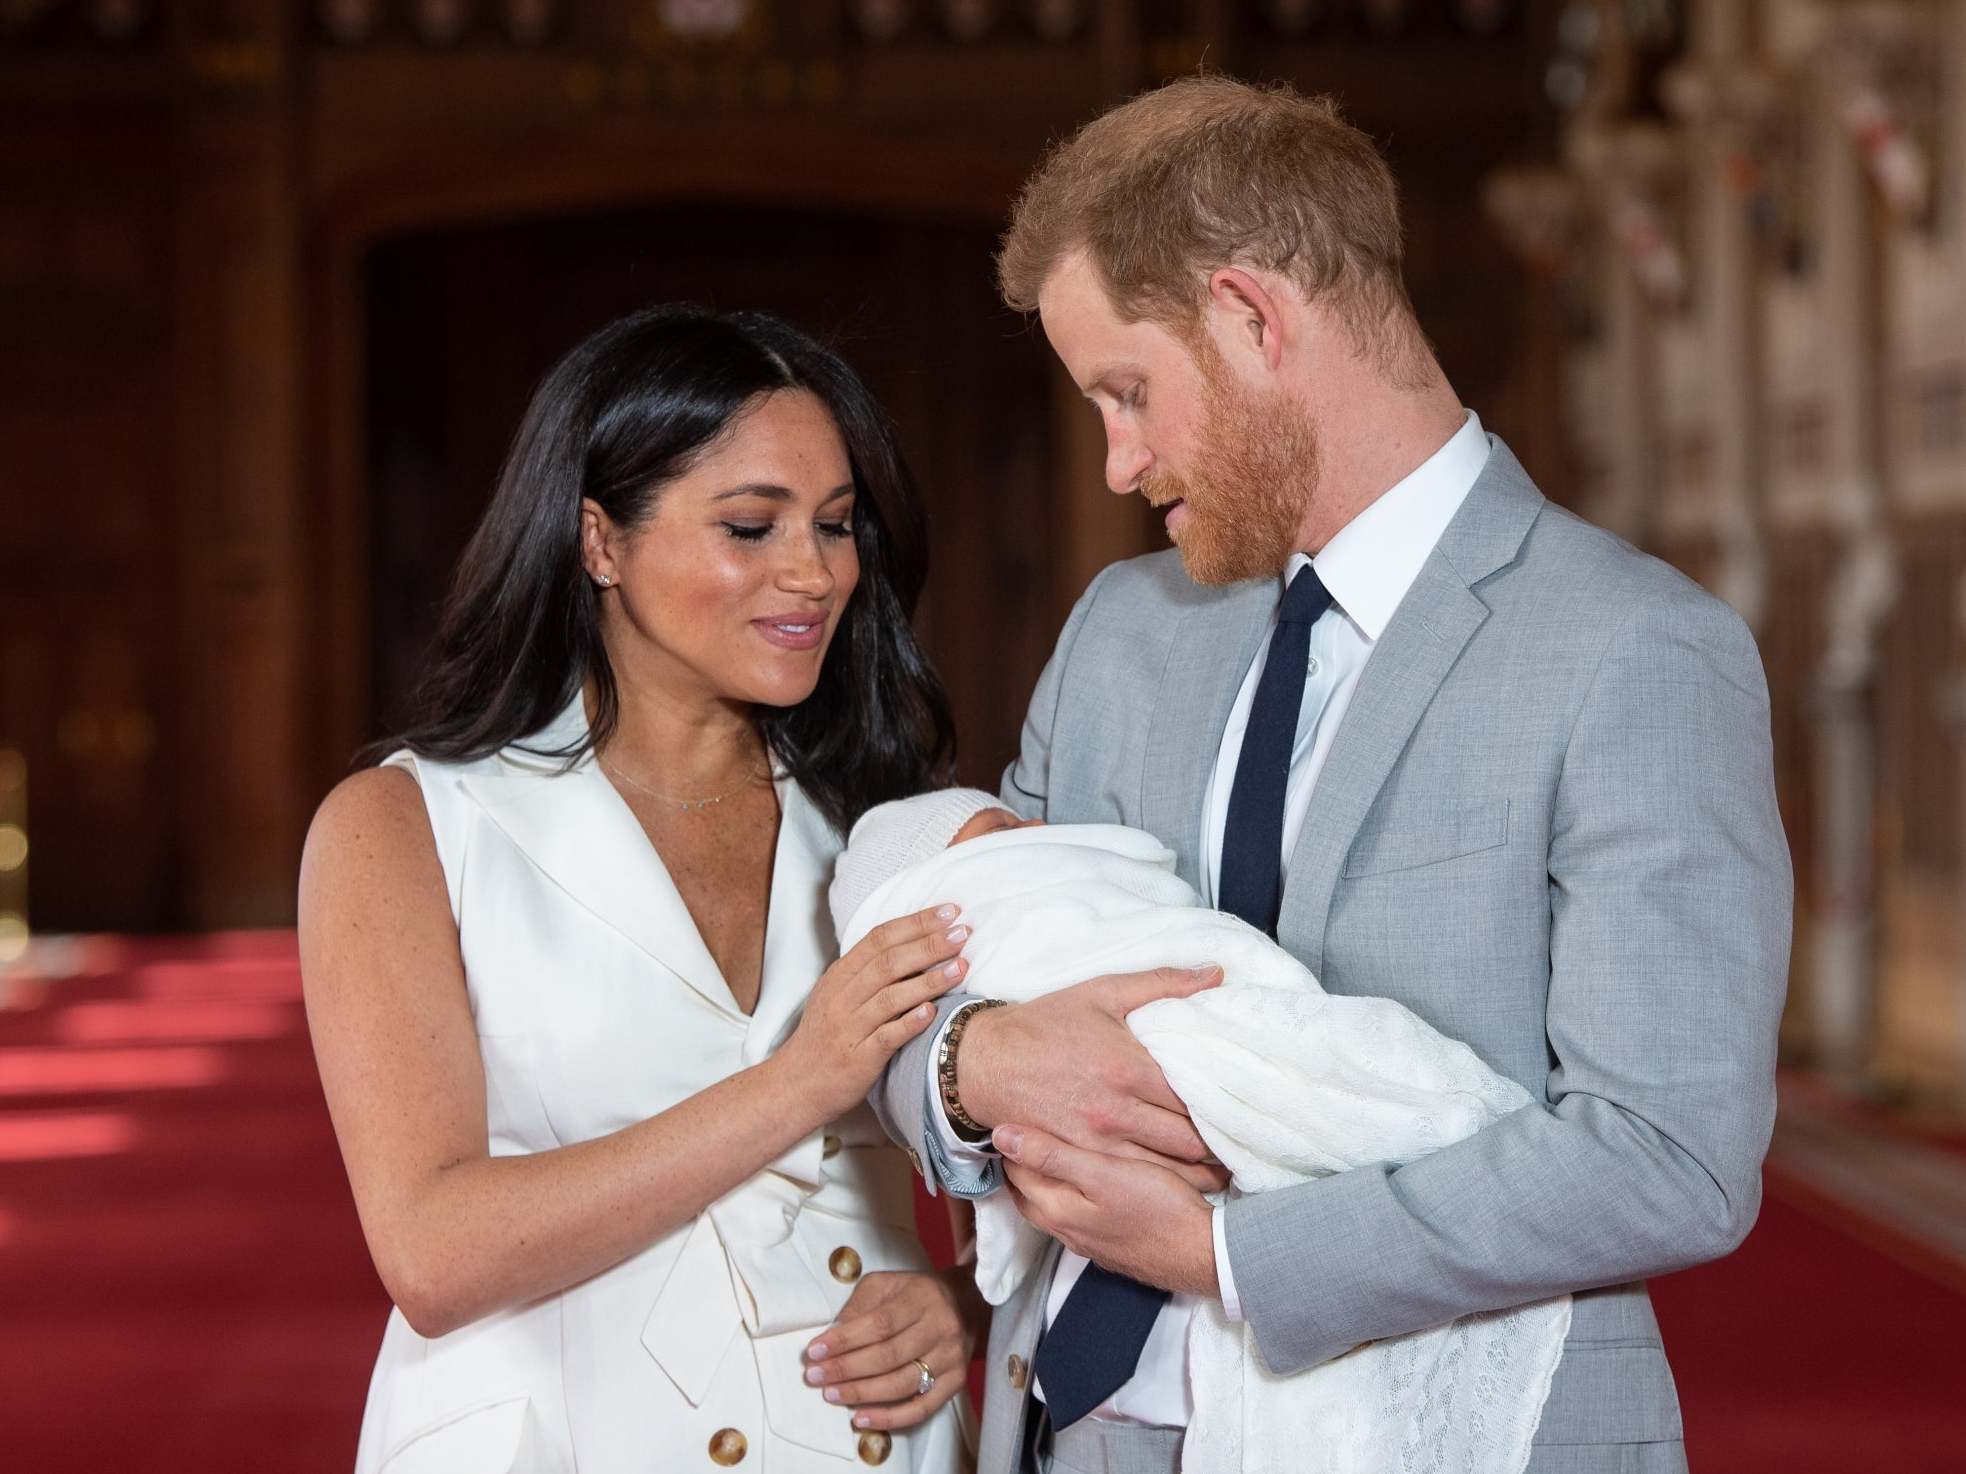 Meghan Markle Wears Dior Dress To Archie's Christening